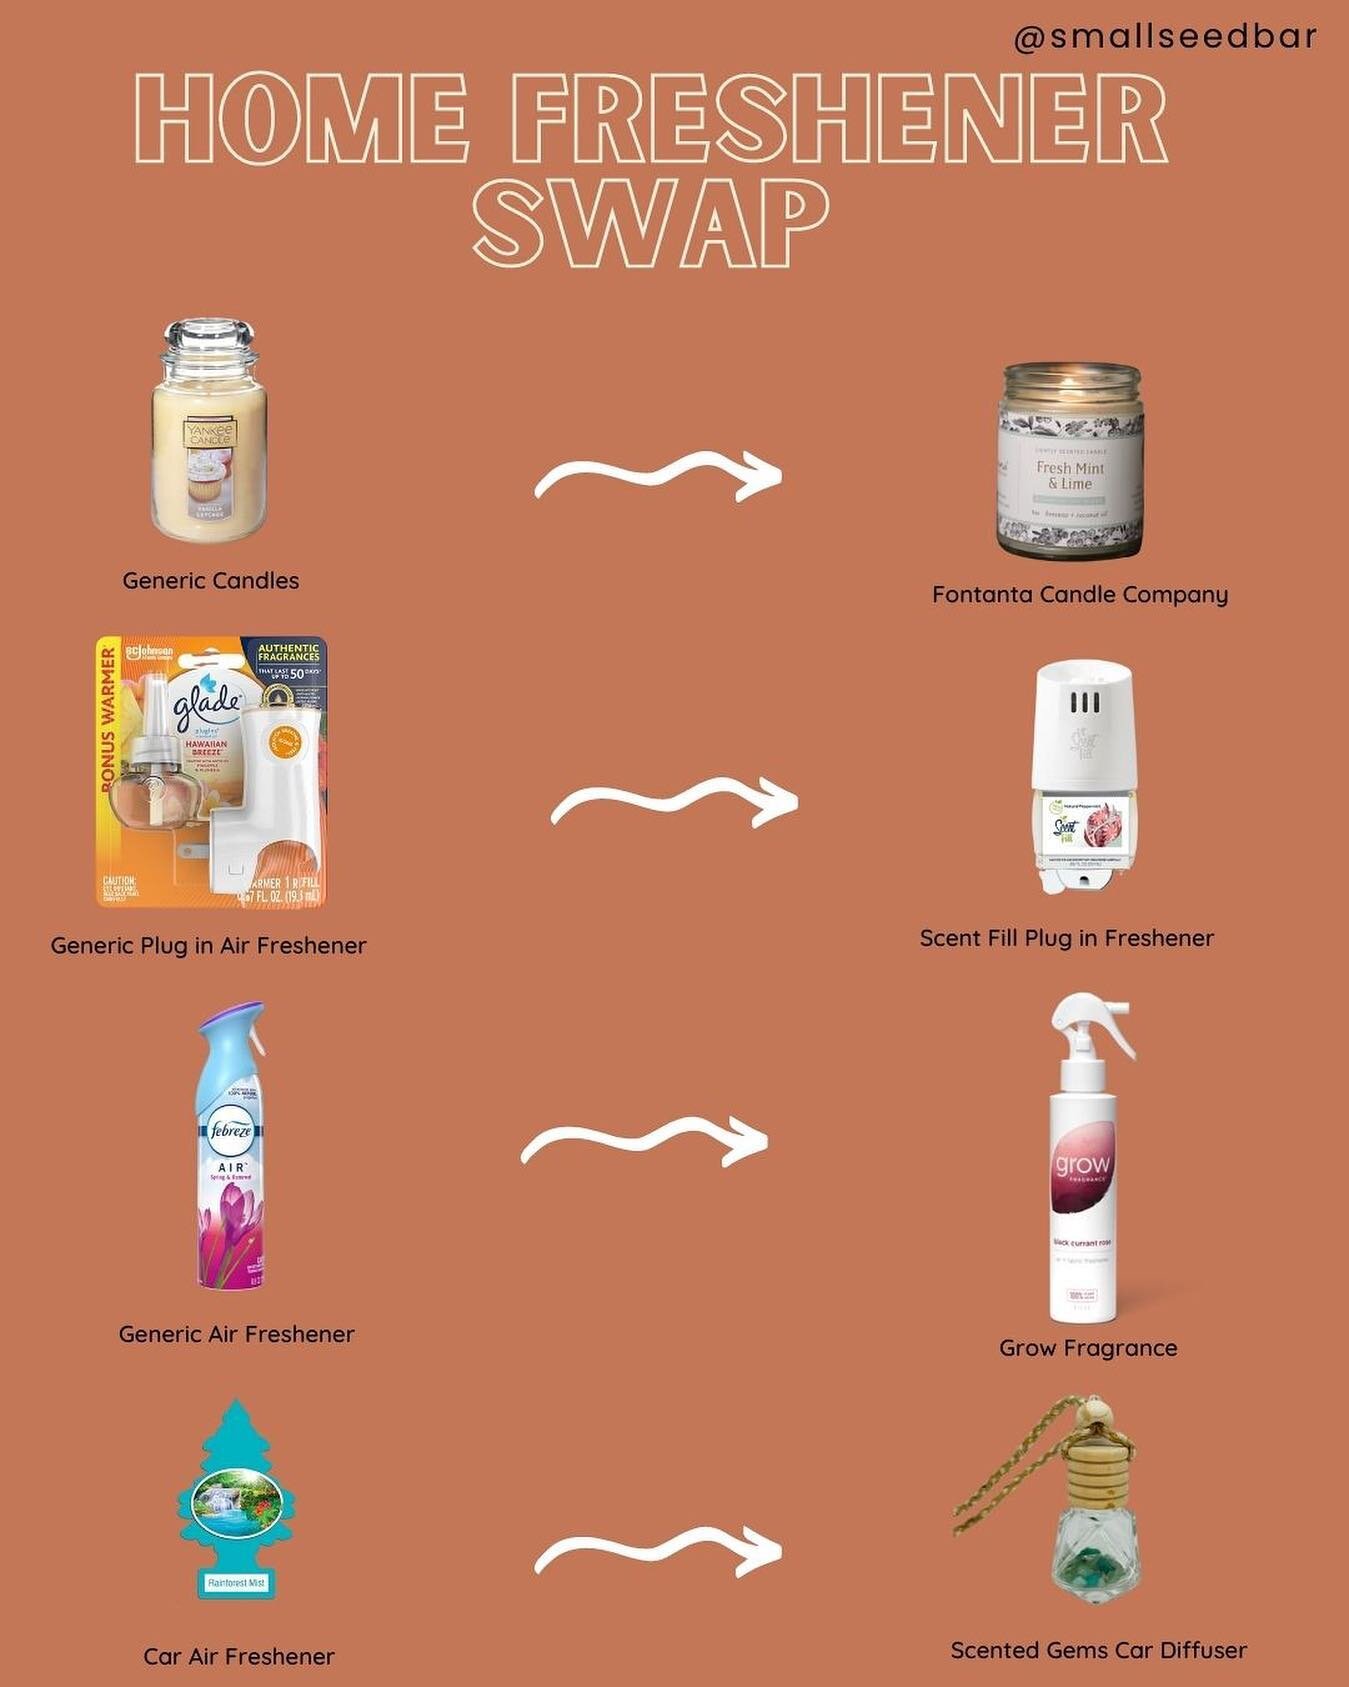 Good Smelling Home Swap 💥

Before I even dive into this swap I first want to say every one of these can be replaced with water and quality essential oils. Which is completely safe and nontoxic 

My issues with most scented air fresheners (including 